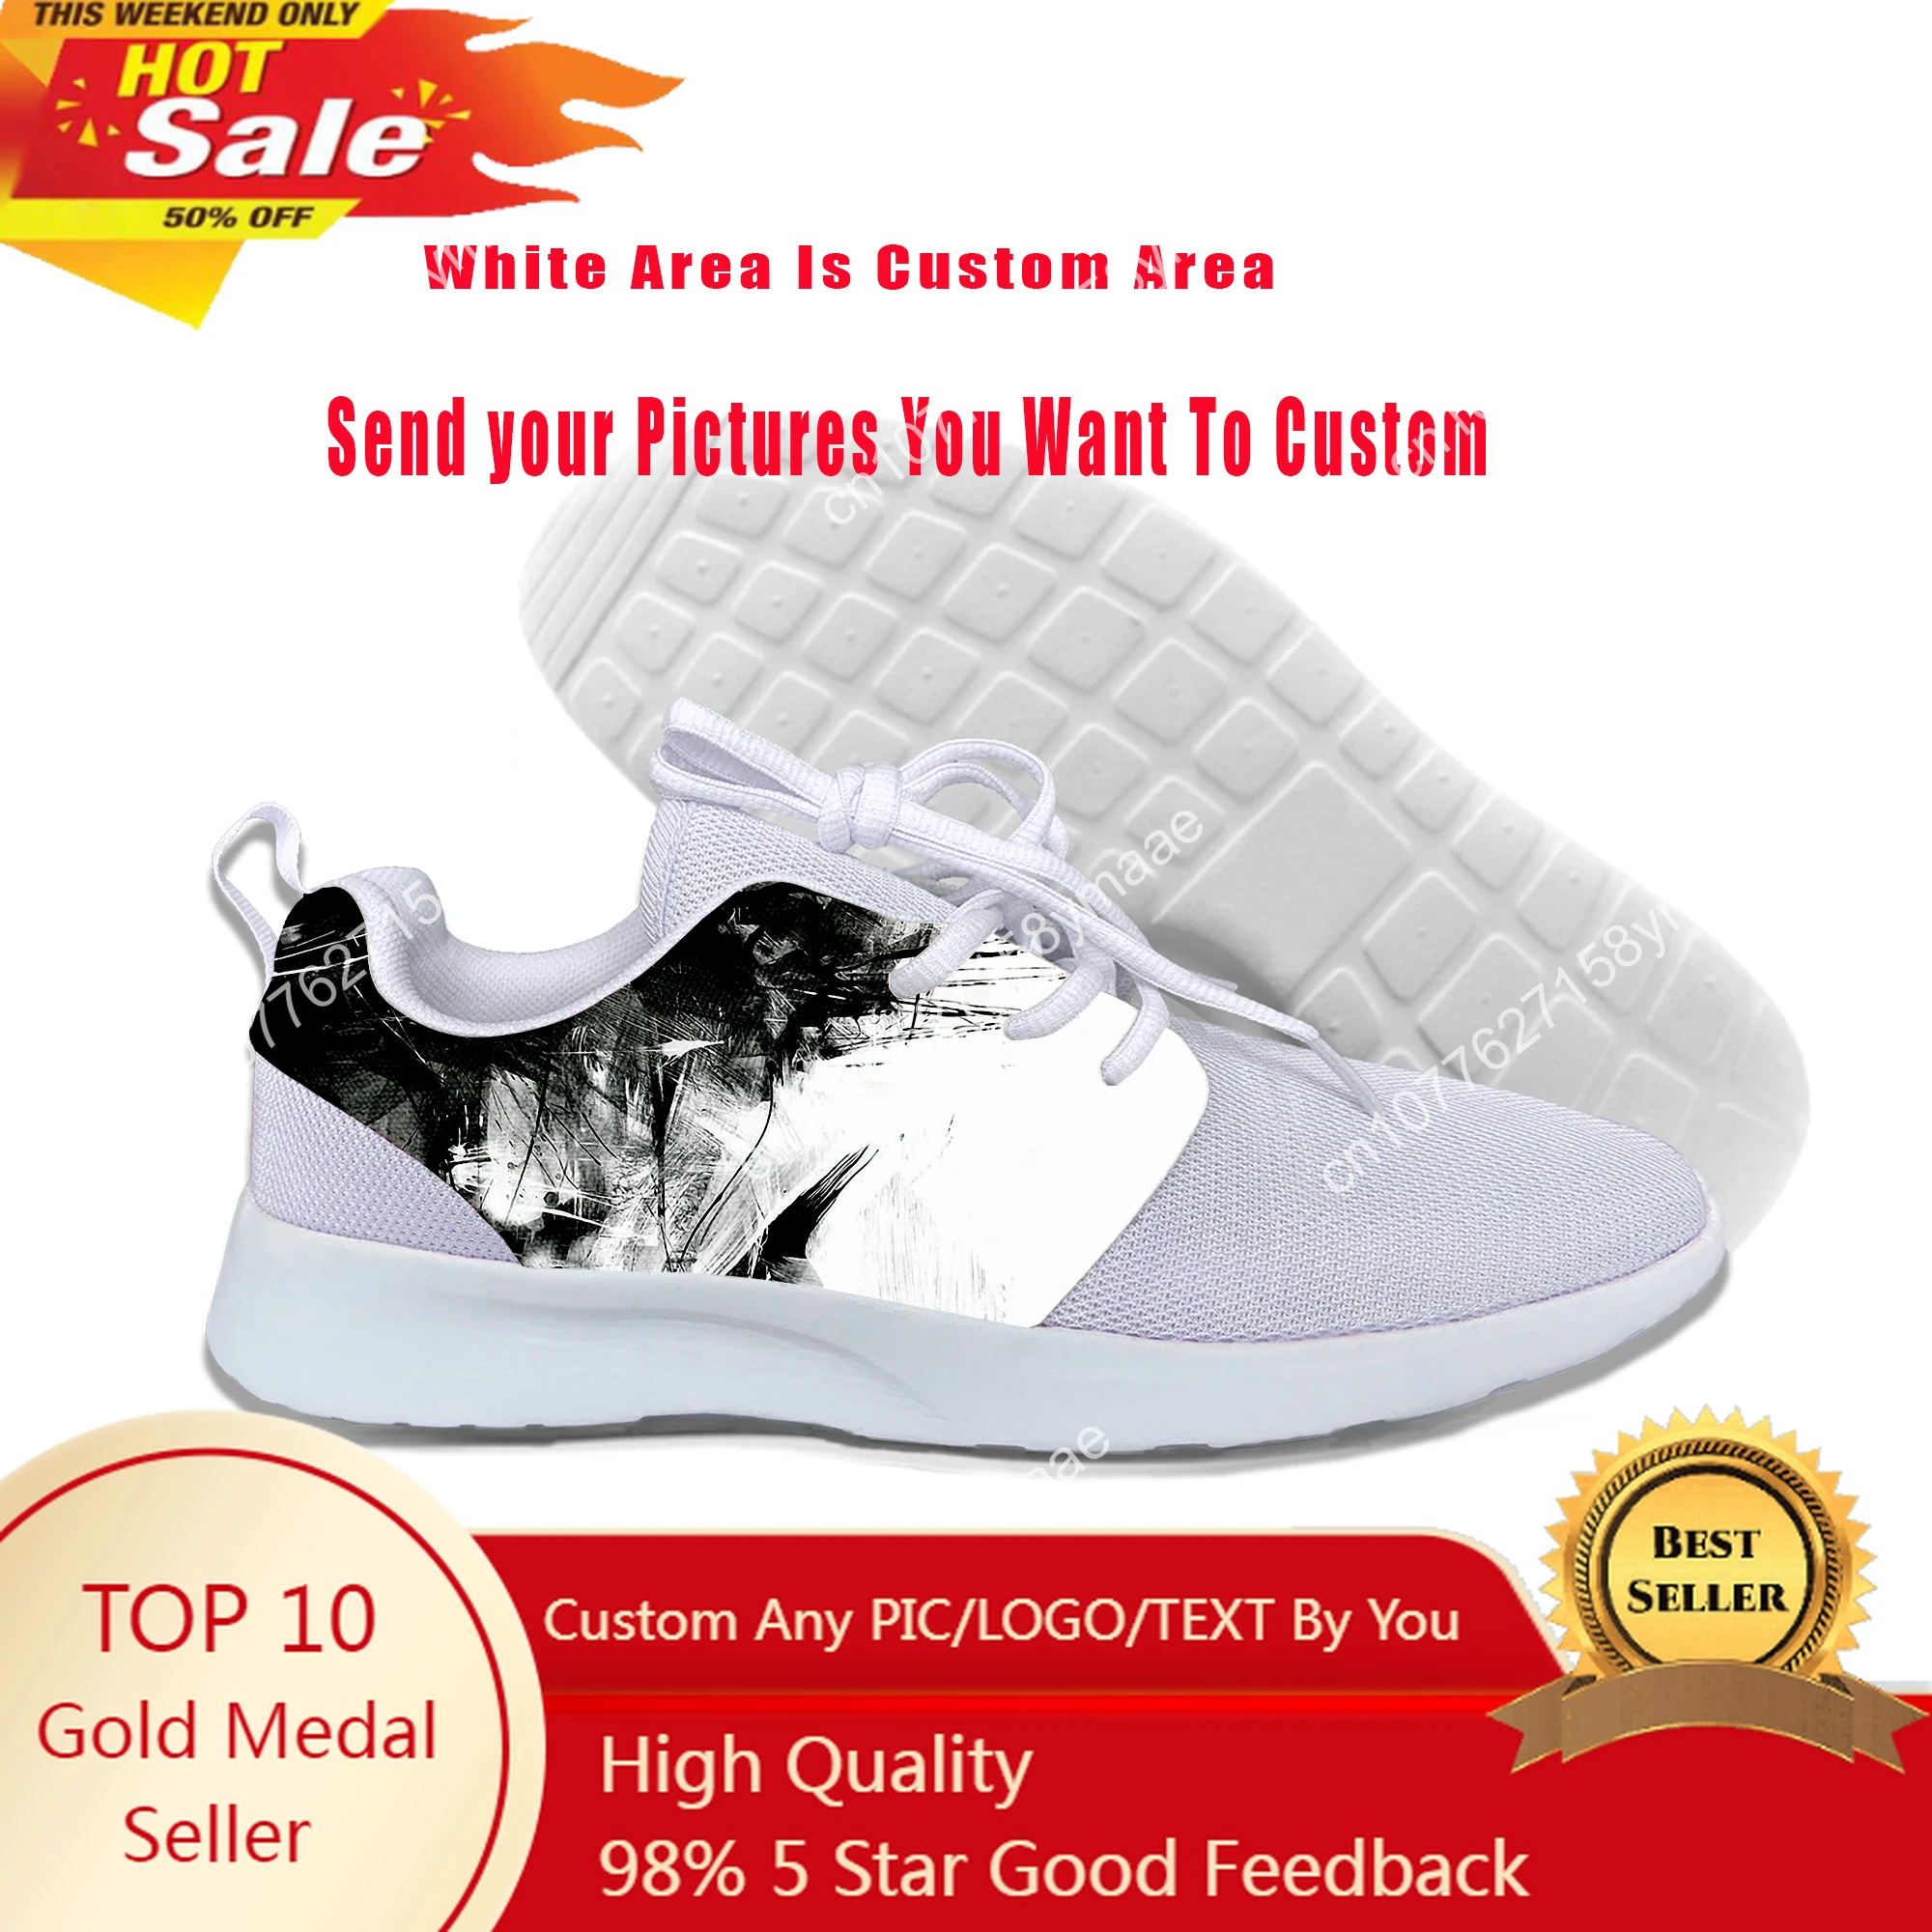 Hot Cool Splashed Paint Casual Shoes Summer Shoes Men Short Printed 3D Sneakers Lightweight Running Shoes Classic Sports Shoes hot cool splashed paint casual shoes summer shoes men short printed 3d sneakers lightweight running shoes classic sports shoes